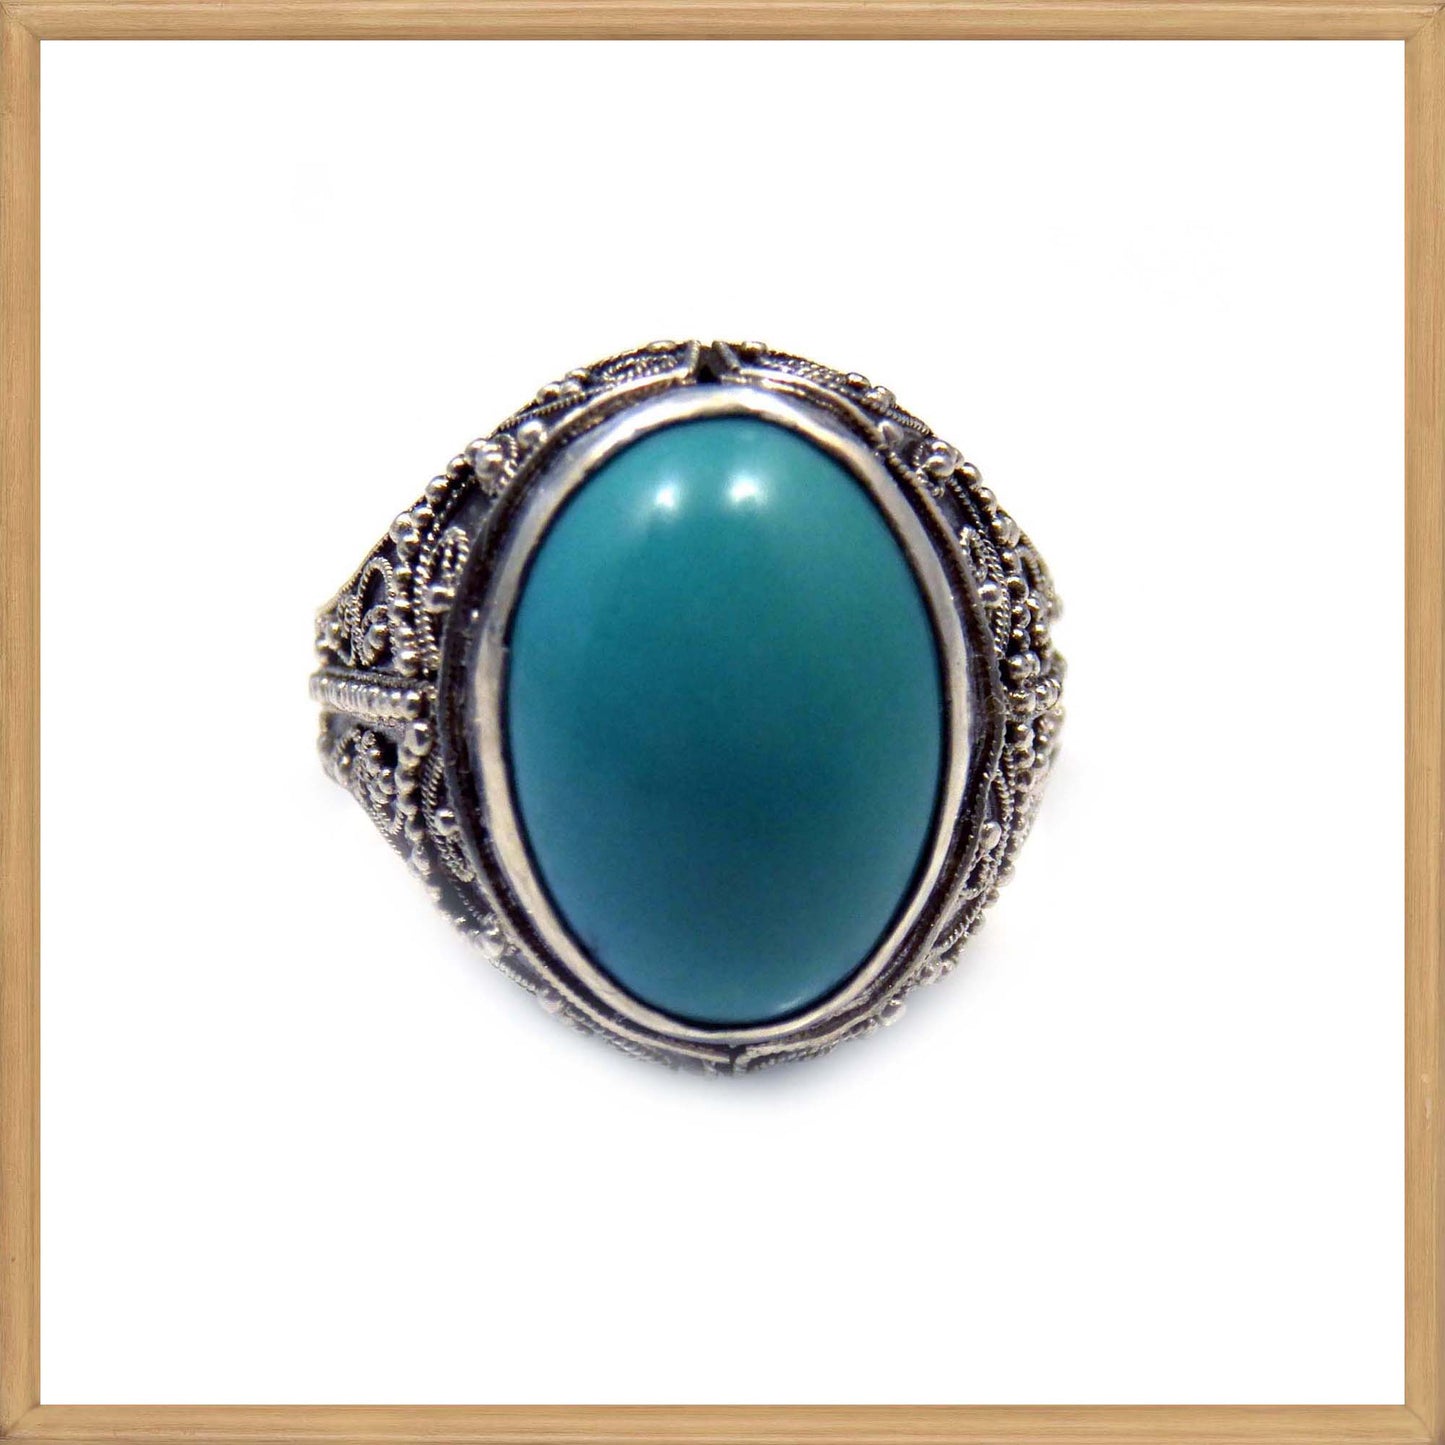 Large Turquoise Chinese Antique Ring in sterling silver